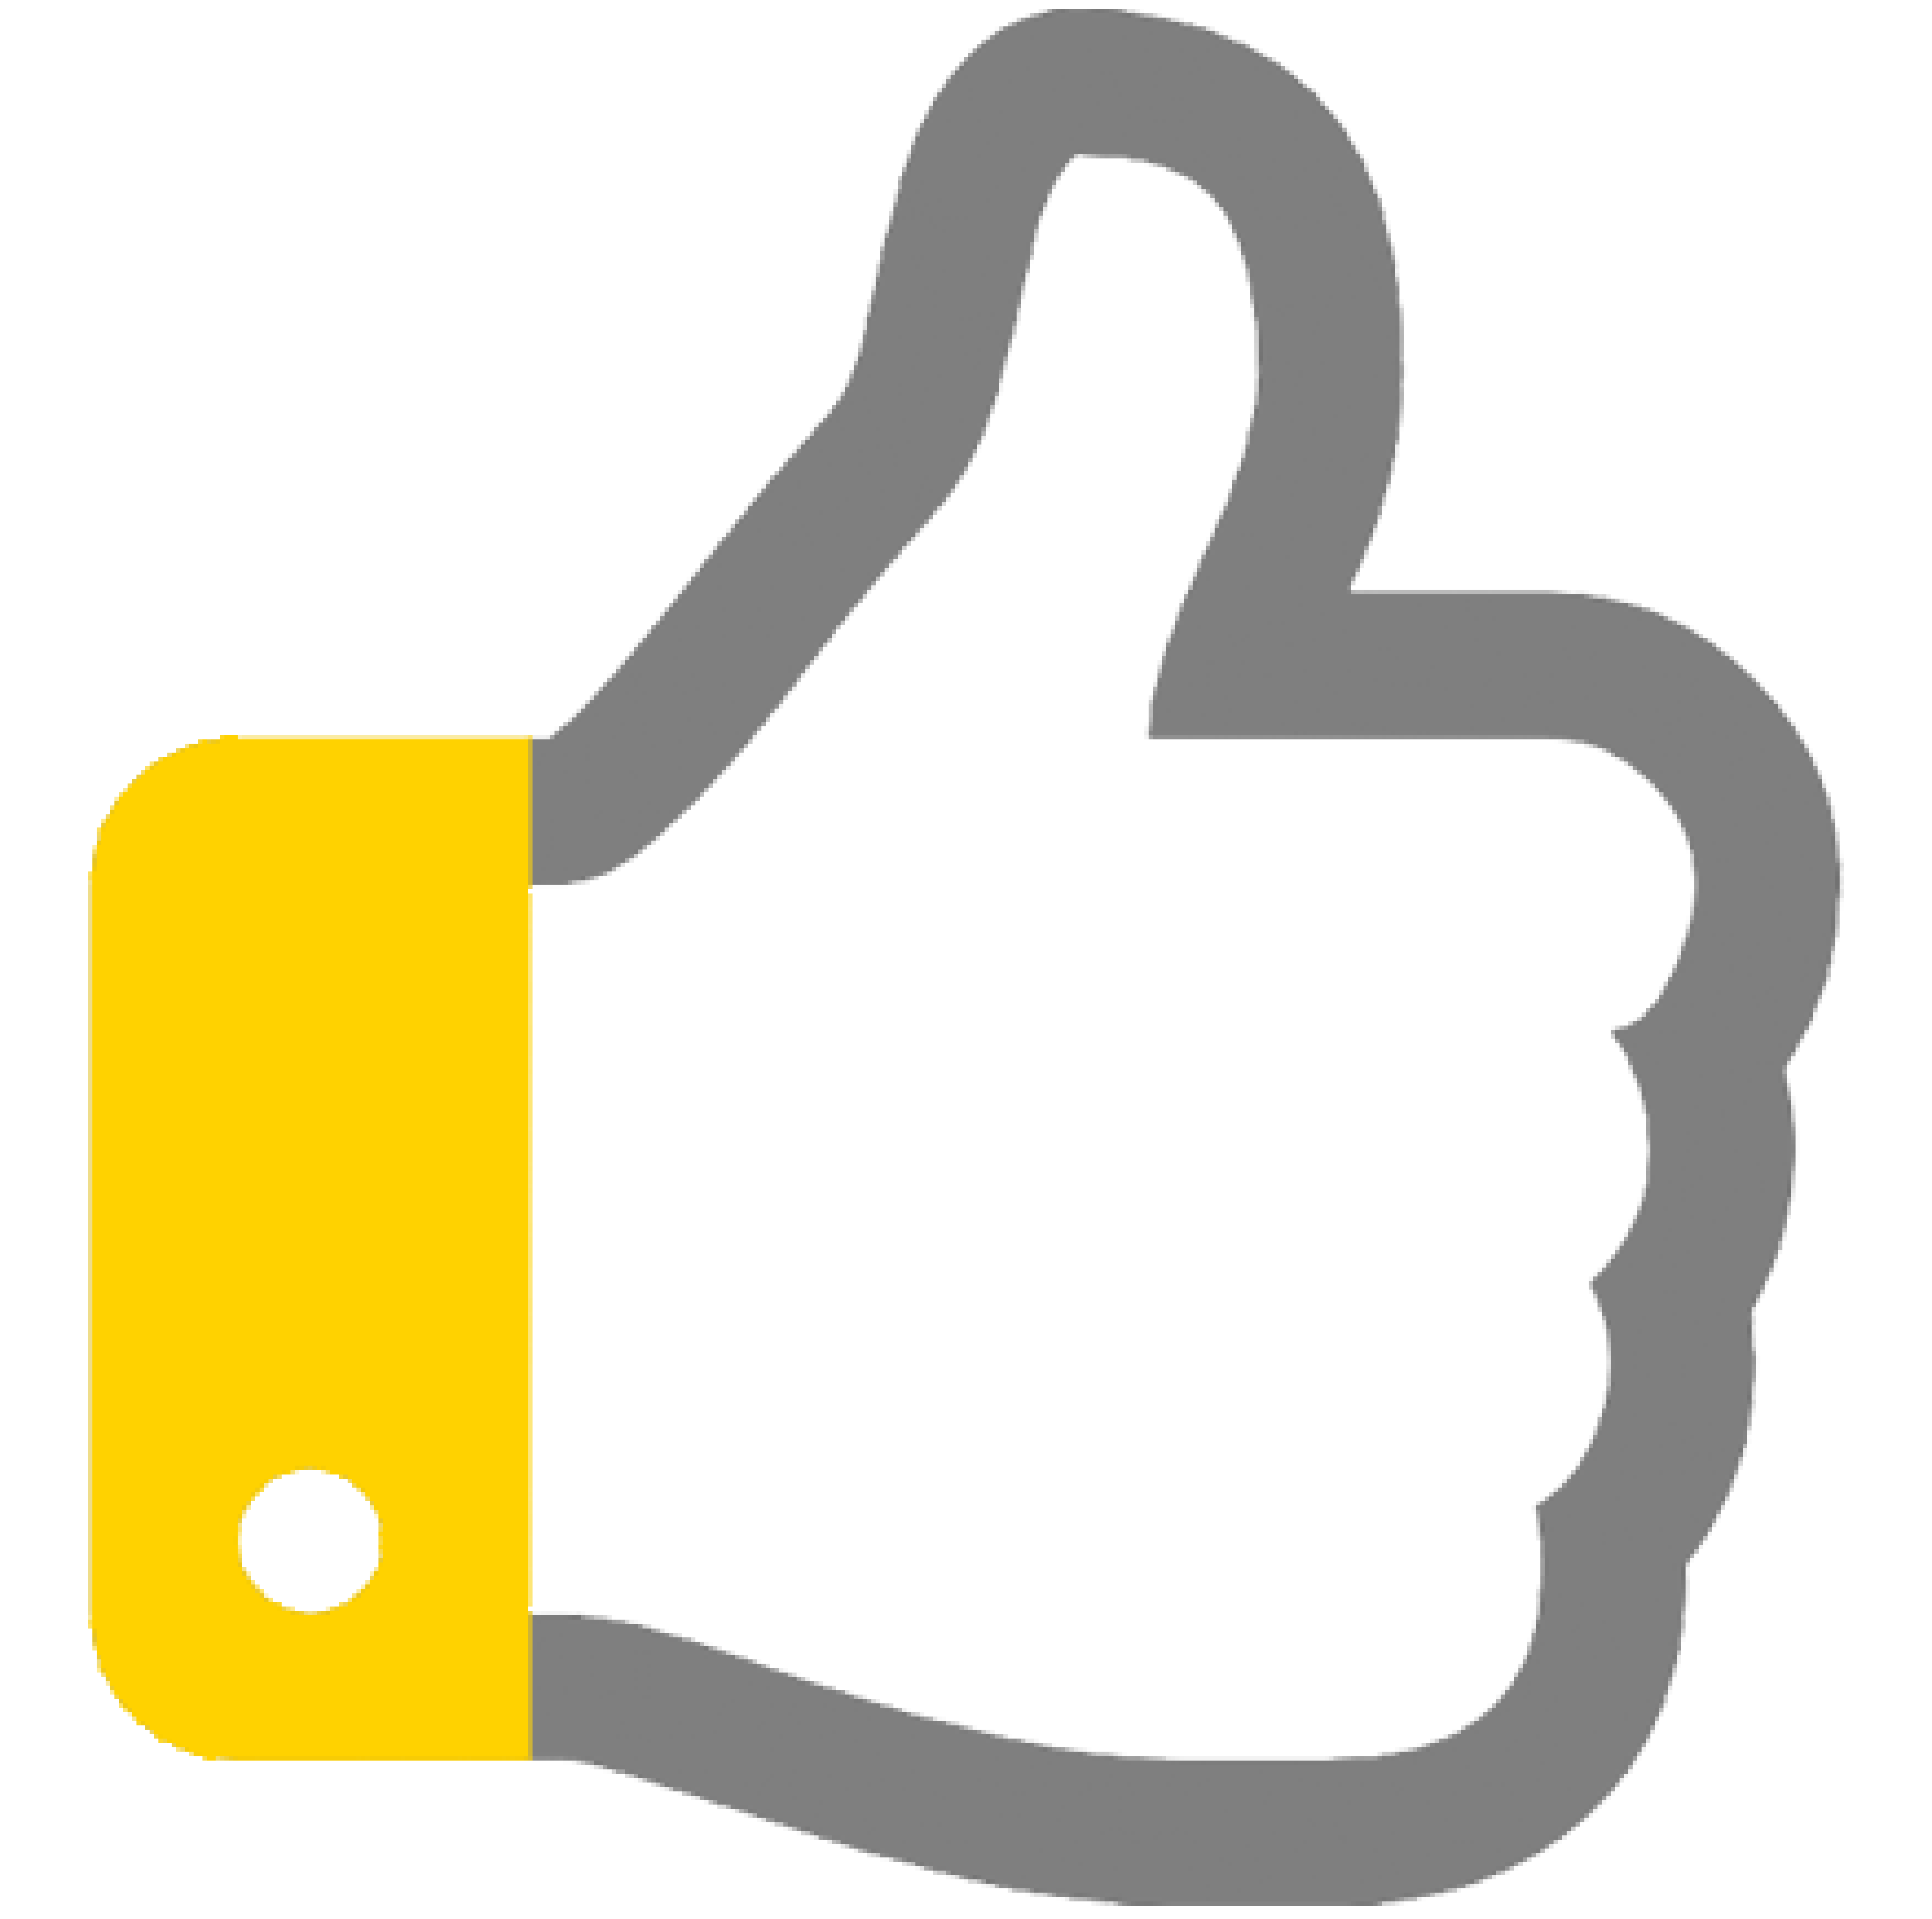 An icon containing a hand with a yellow sleeve that forms the thumbs-up gesture.